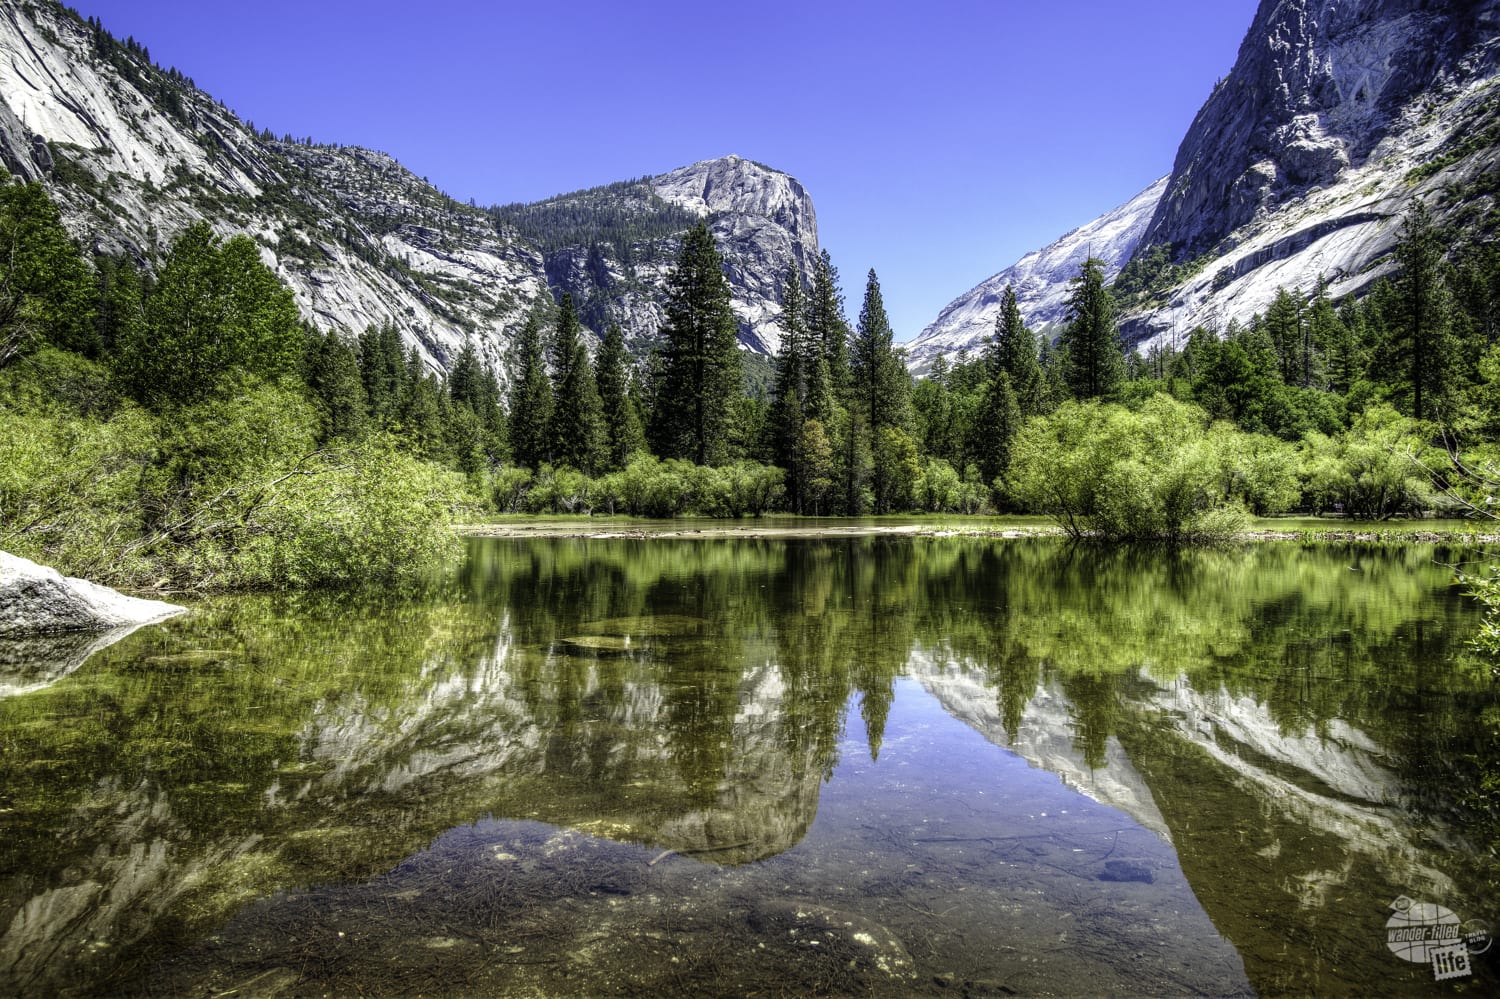 Mirror Lake really is a must-see stop along the Yosemite Valley Loop